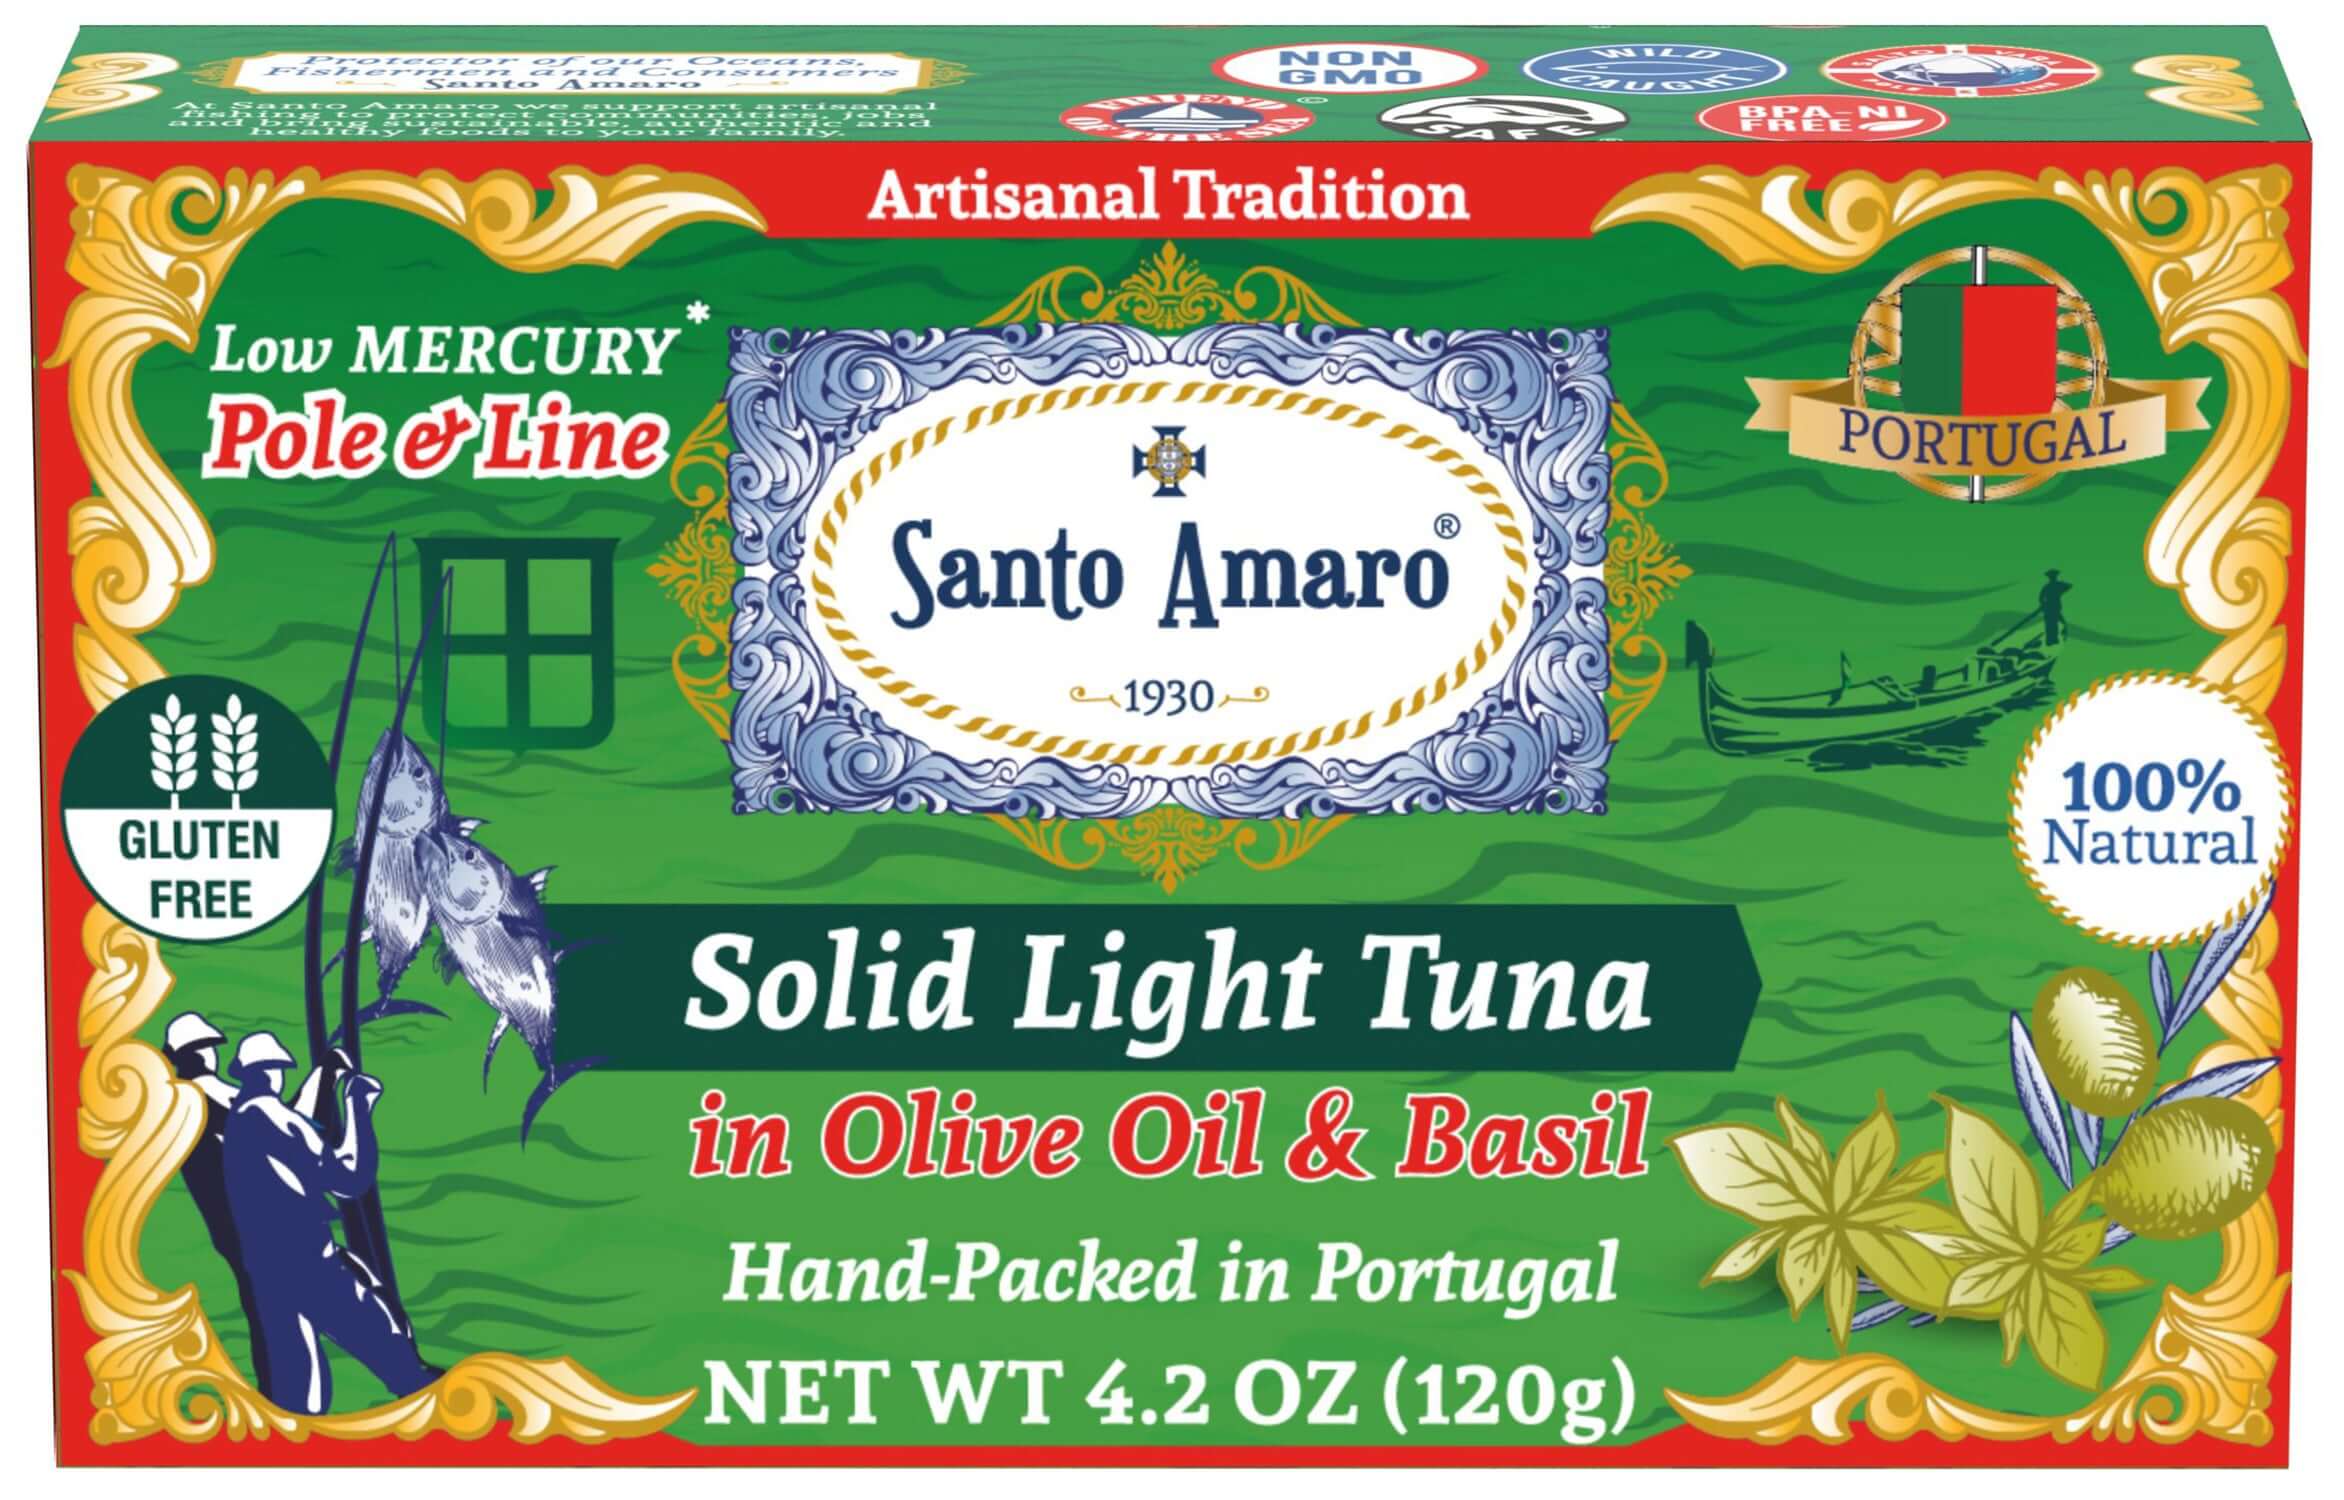 Canned Tuna Fillets in Olive Oil 6 Flavor Variety – PORTUGAL